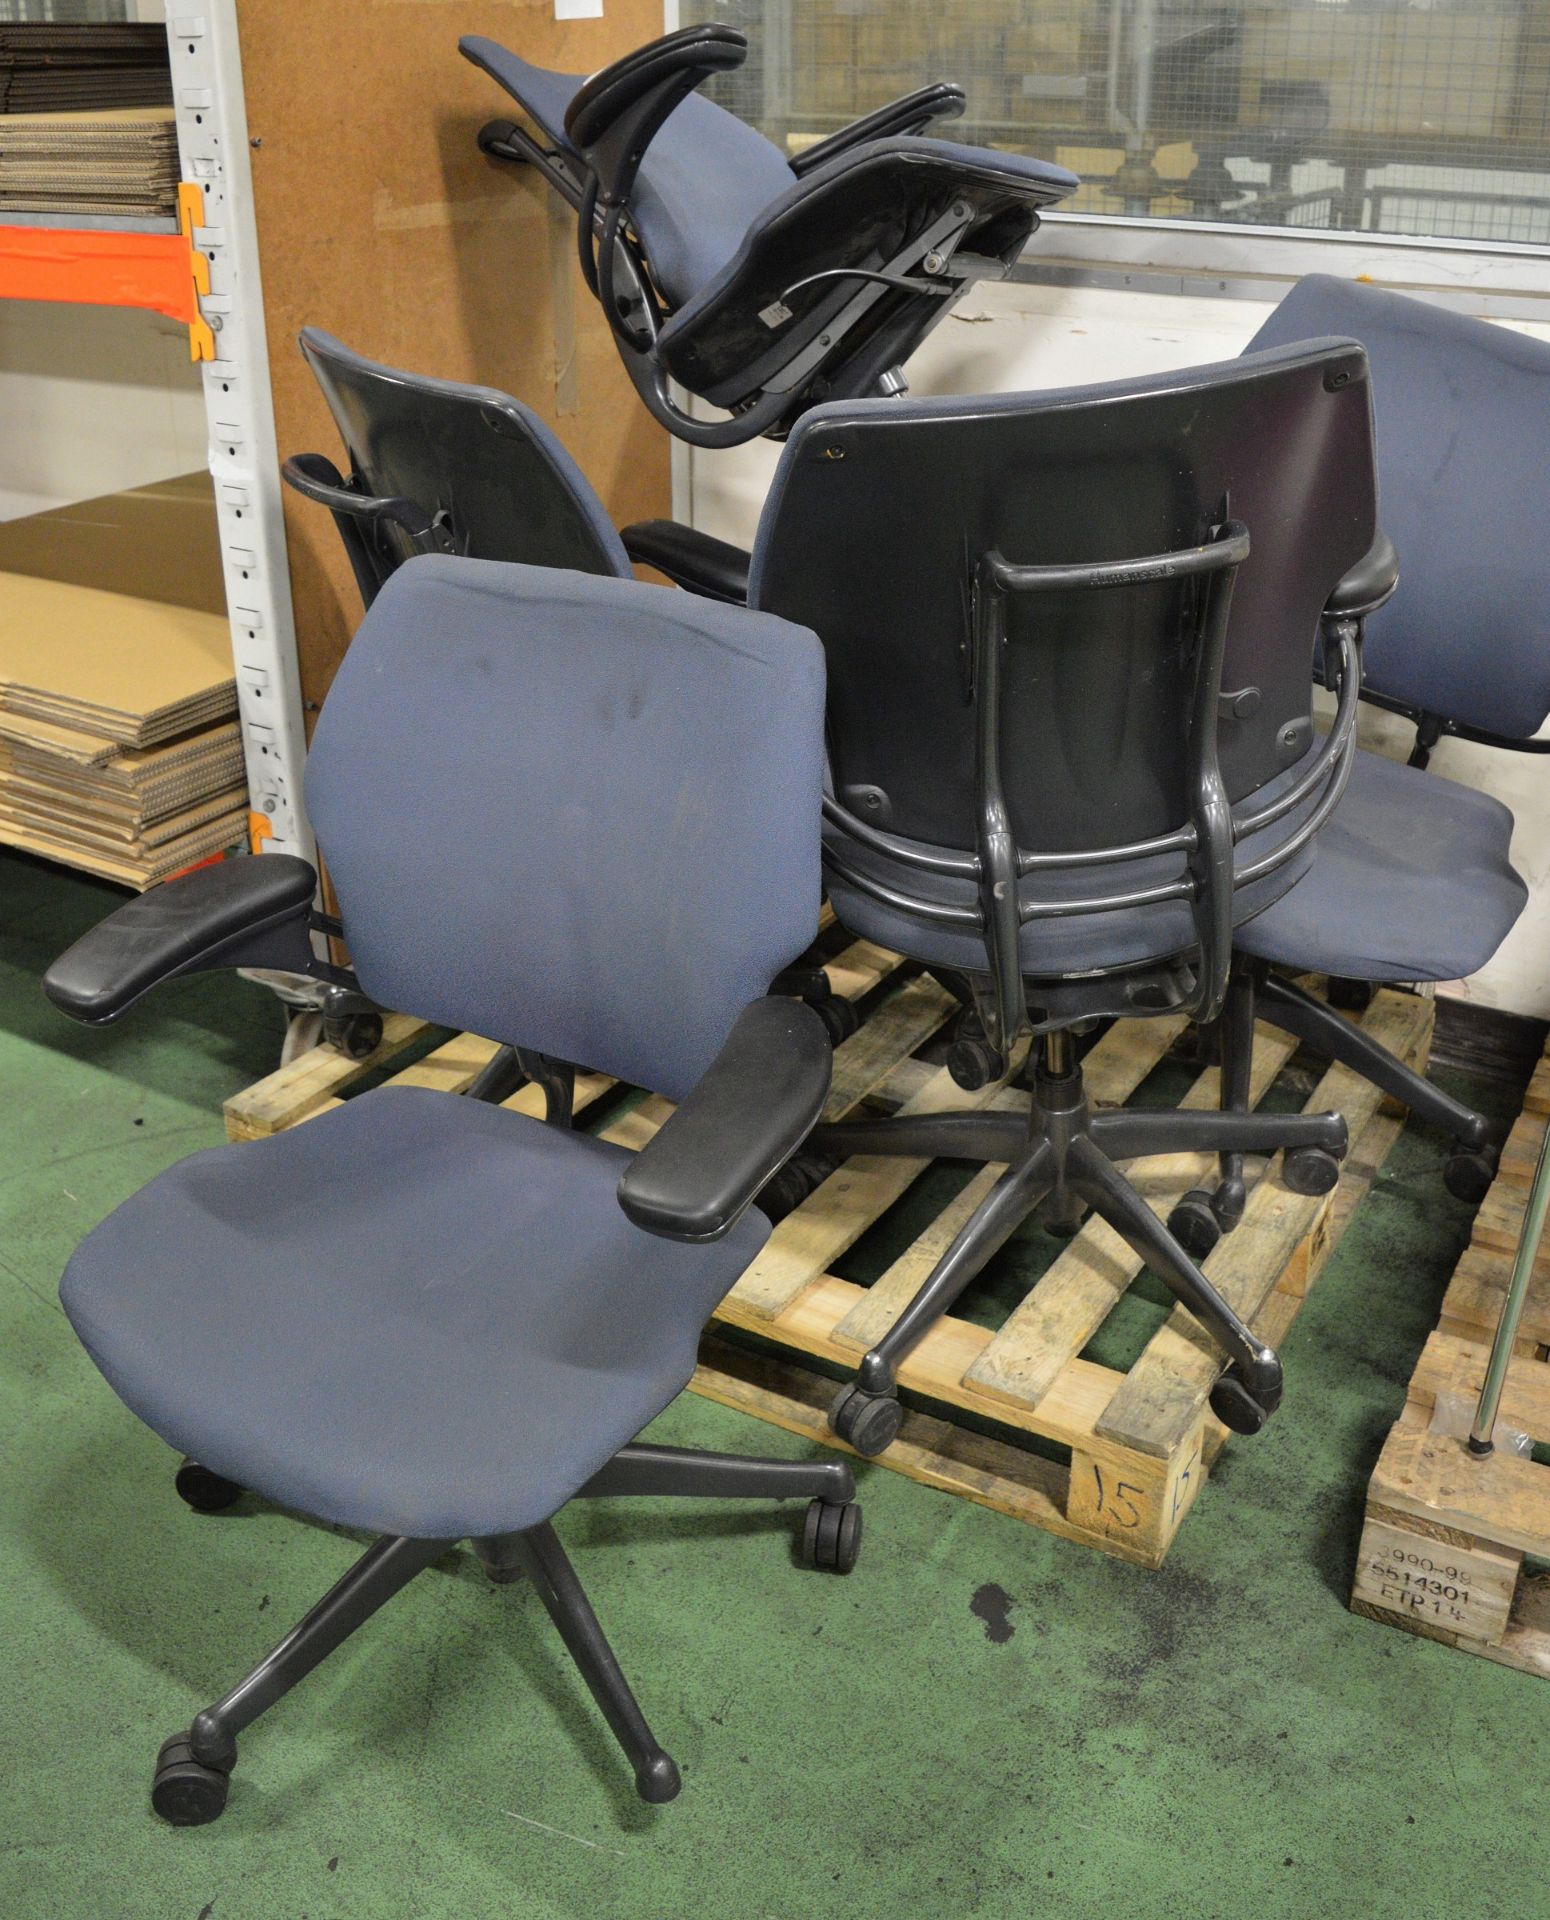 6x Office chairs